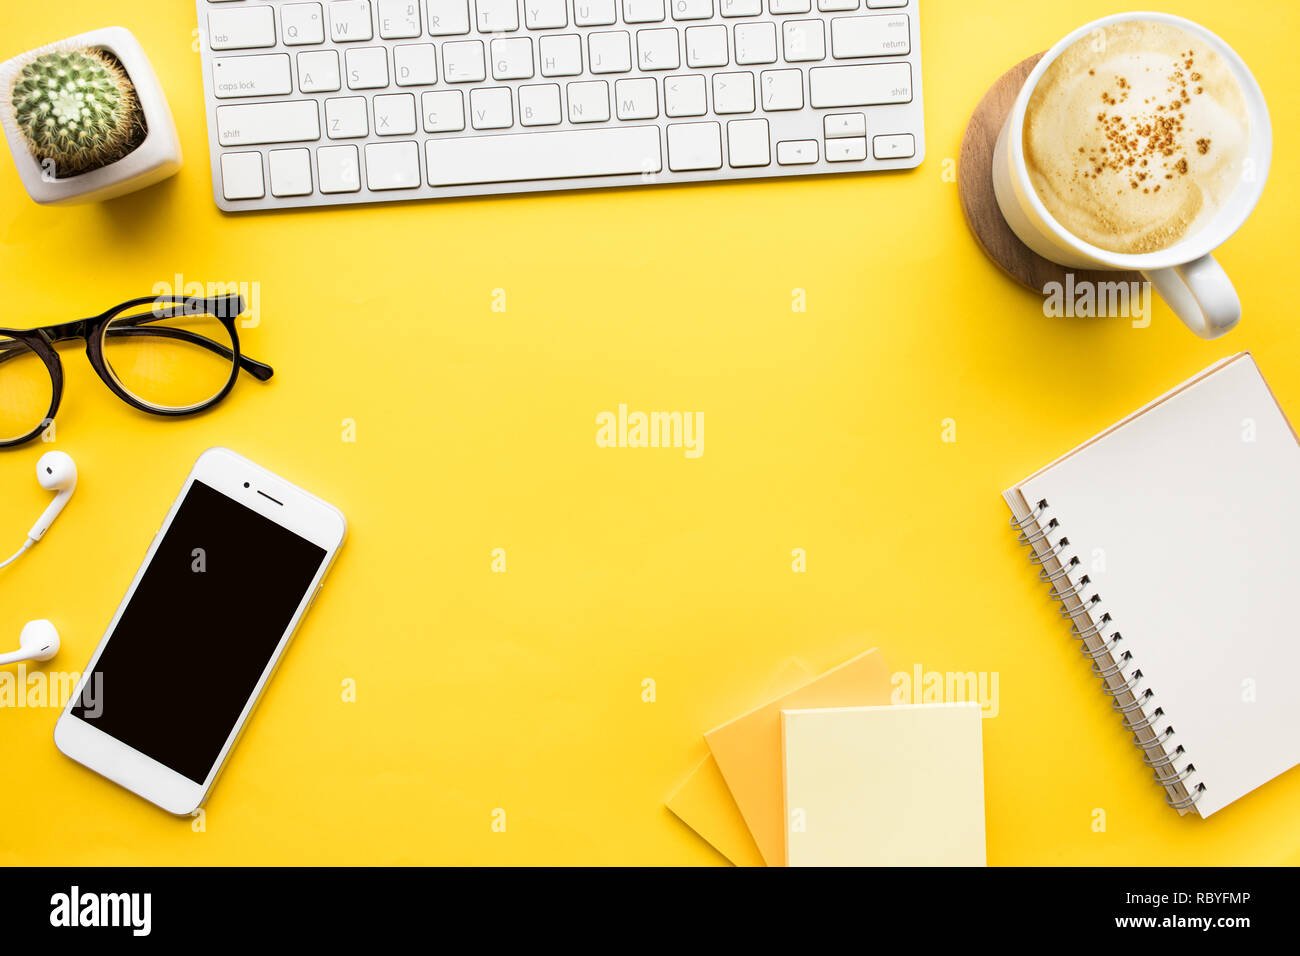 Office table view and gold accessories, mock up background, header site  Stock Photo by ©shatenka07 80022344